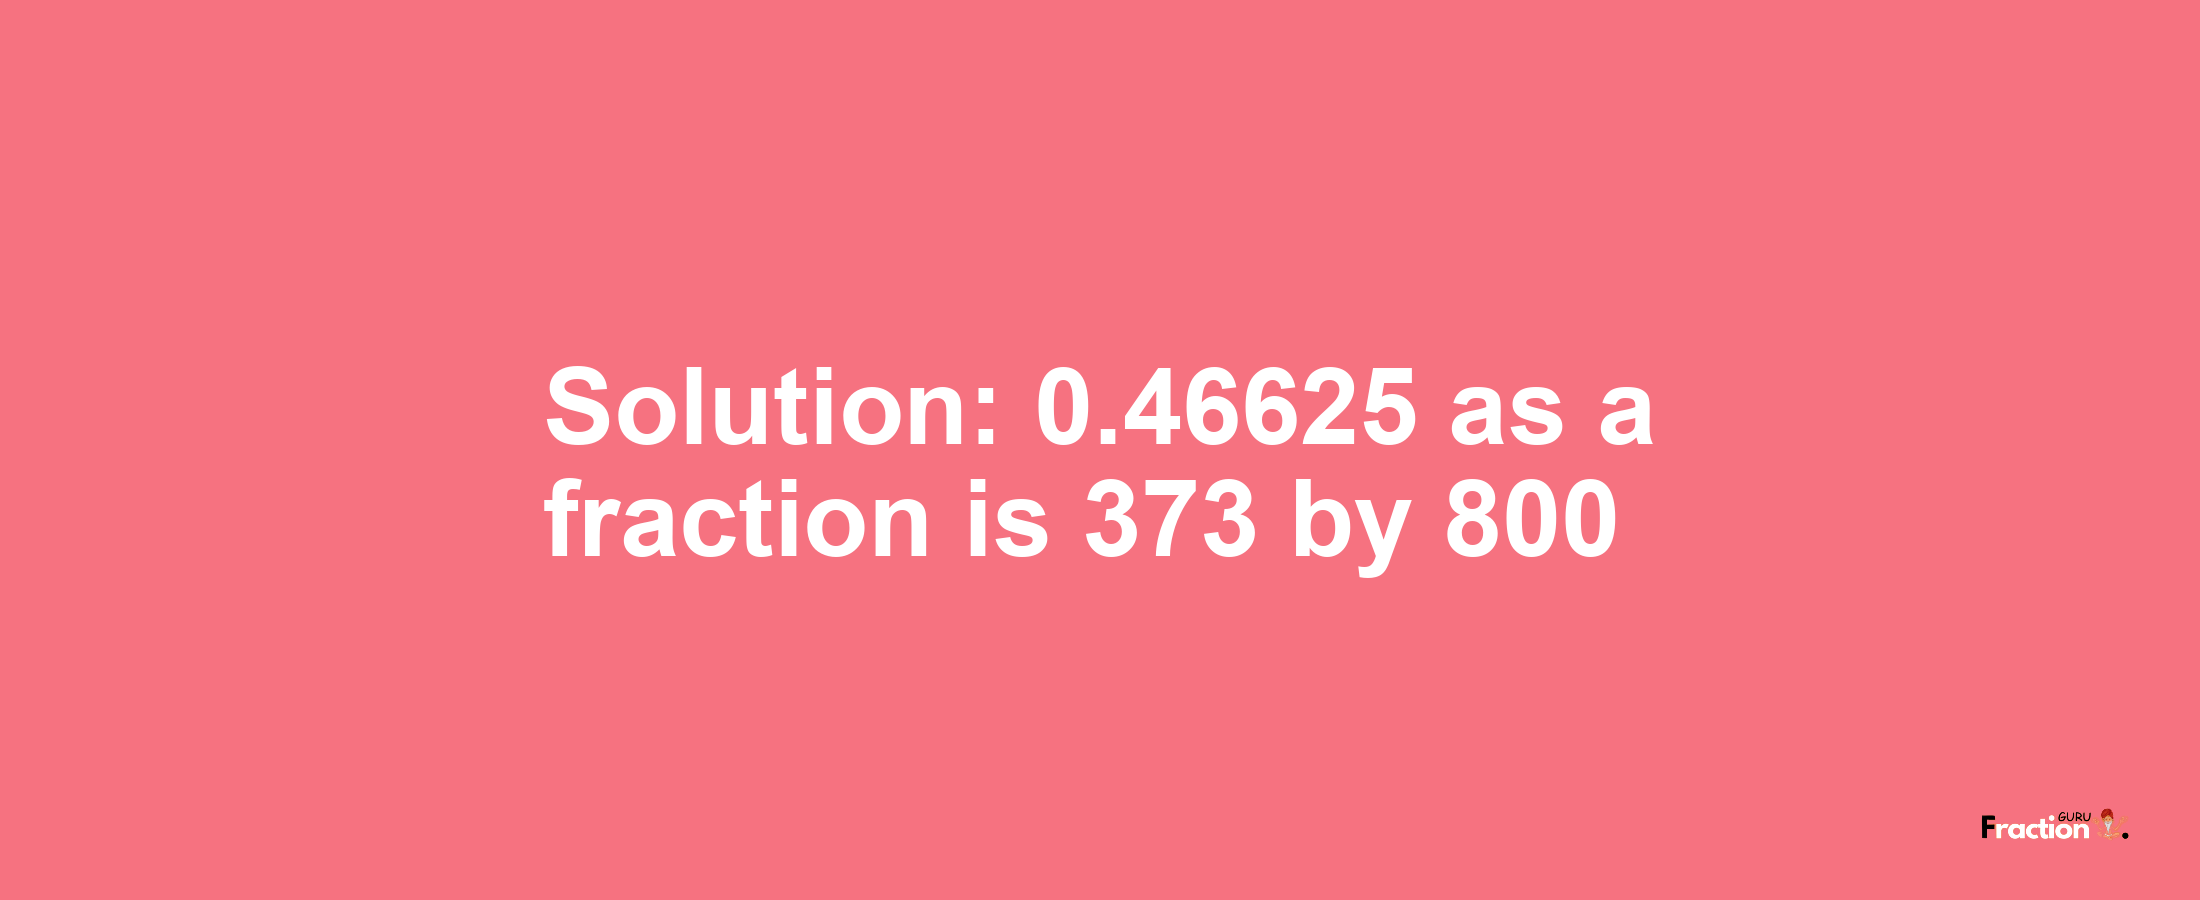 Solution:0.46625 as a fraction is 373/800